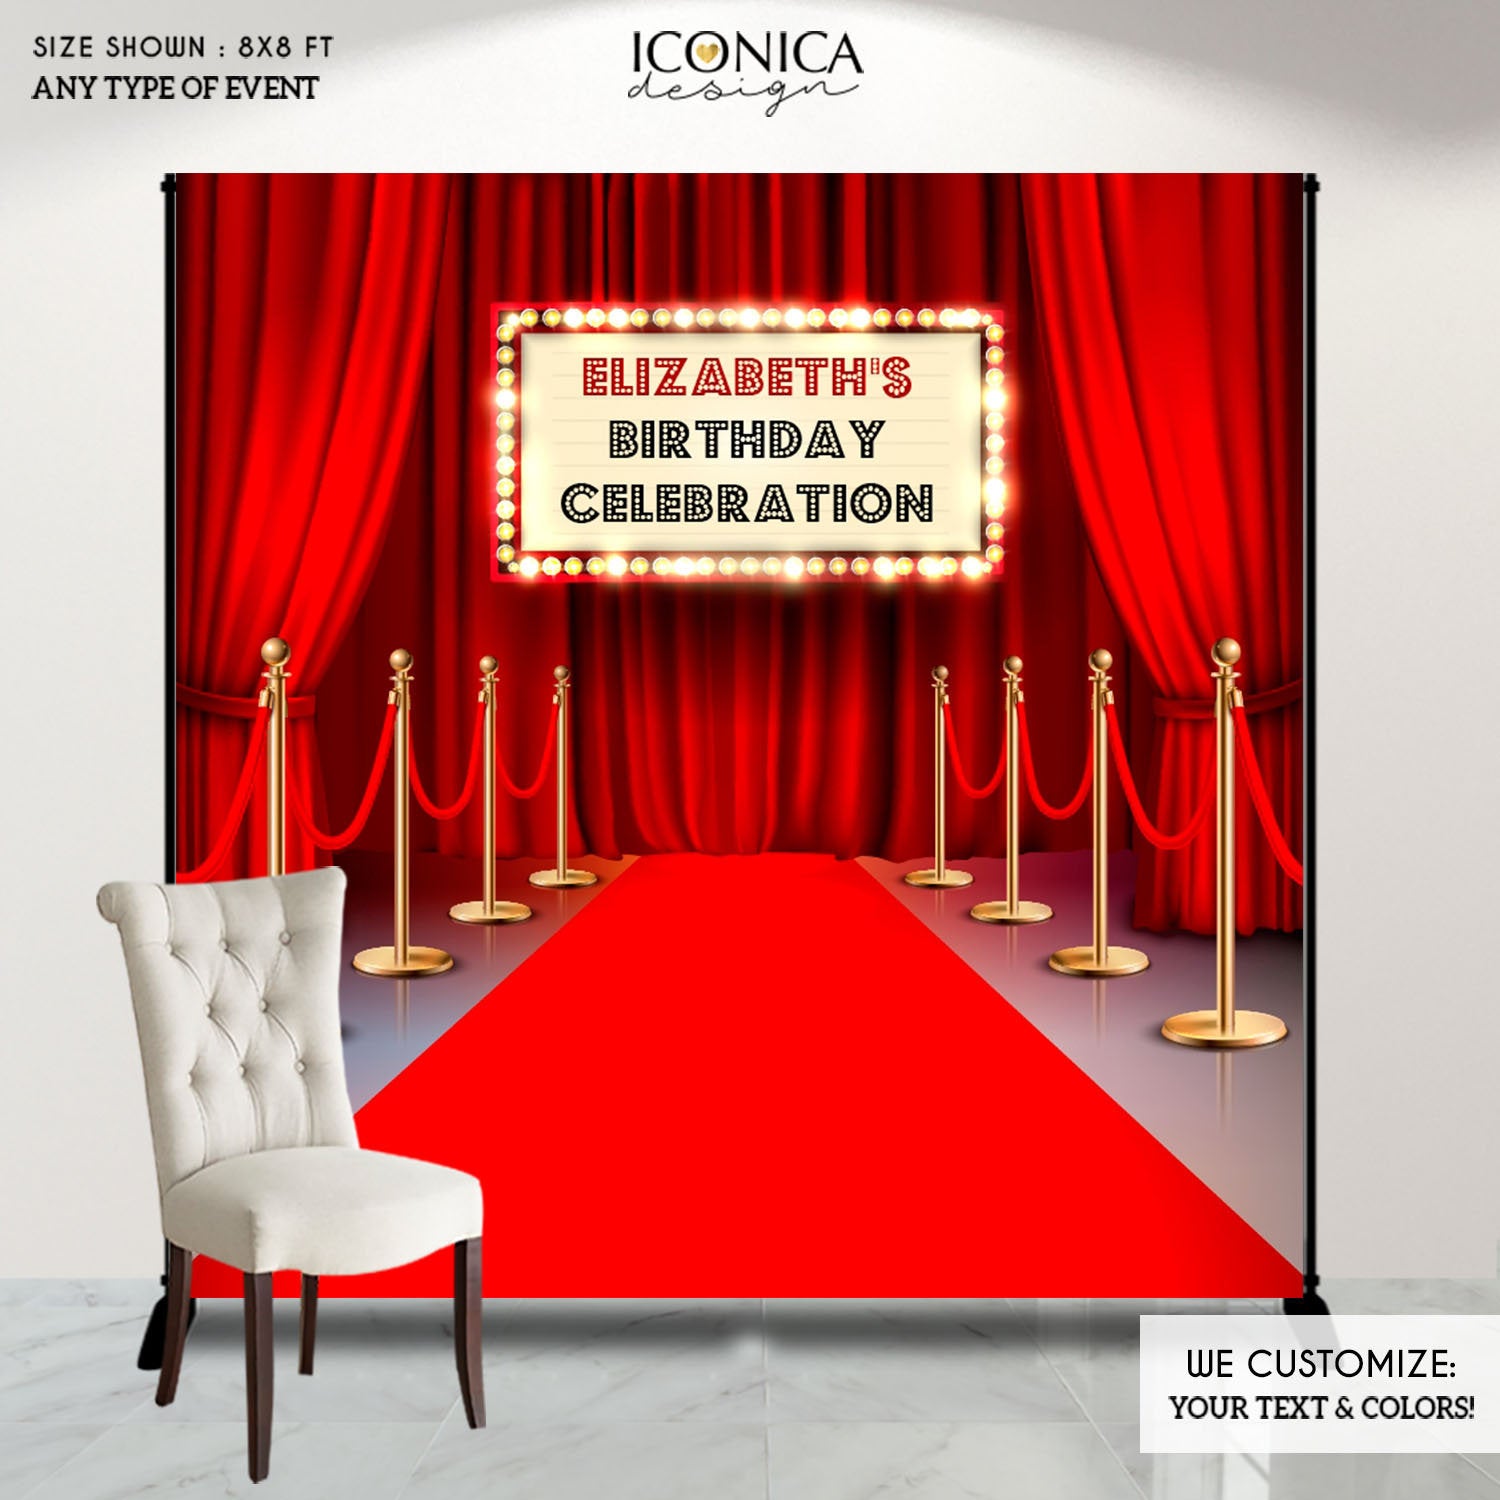 Hollywood Movie Backdrop Night Ceremony Birthday Party Supplies Photo Booth  Prop